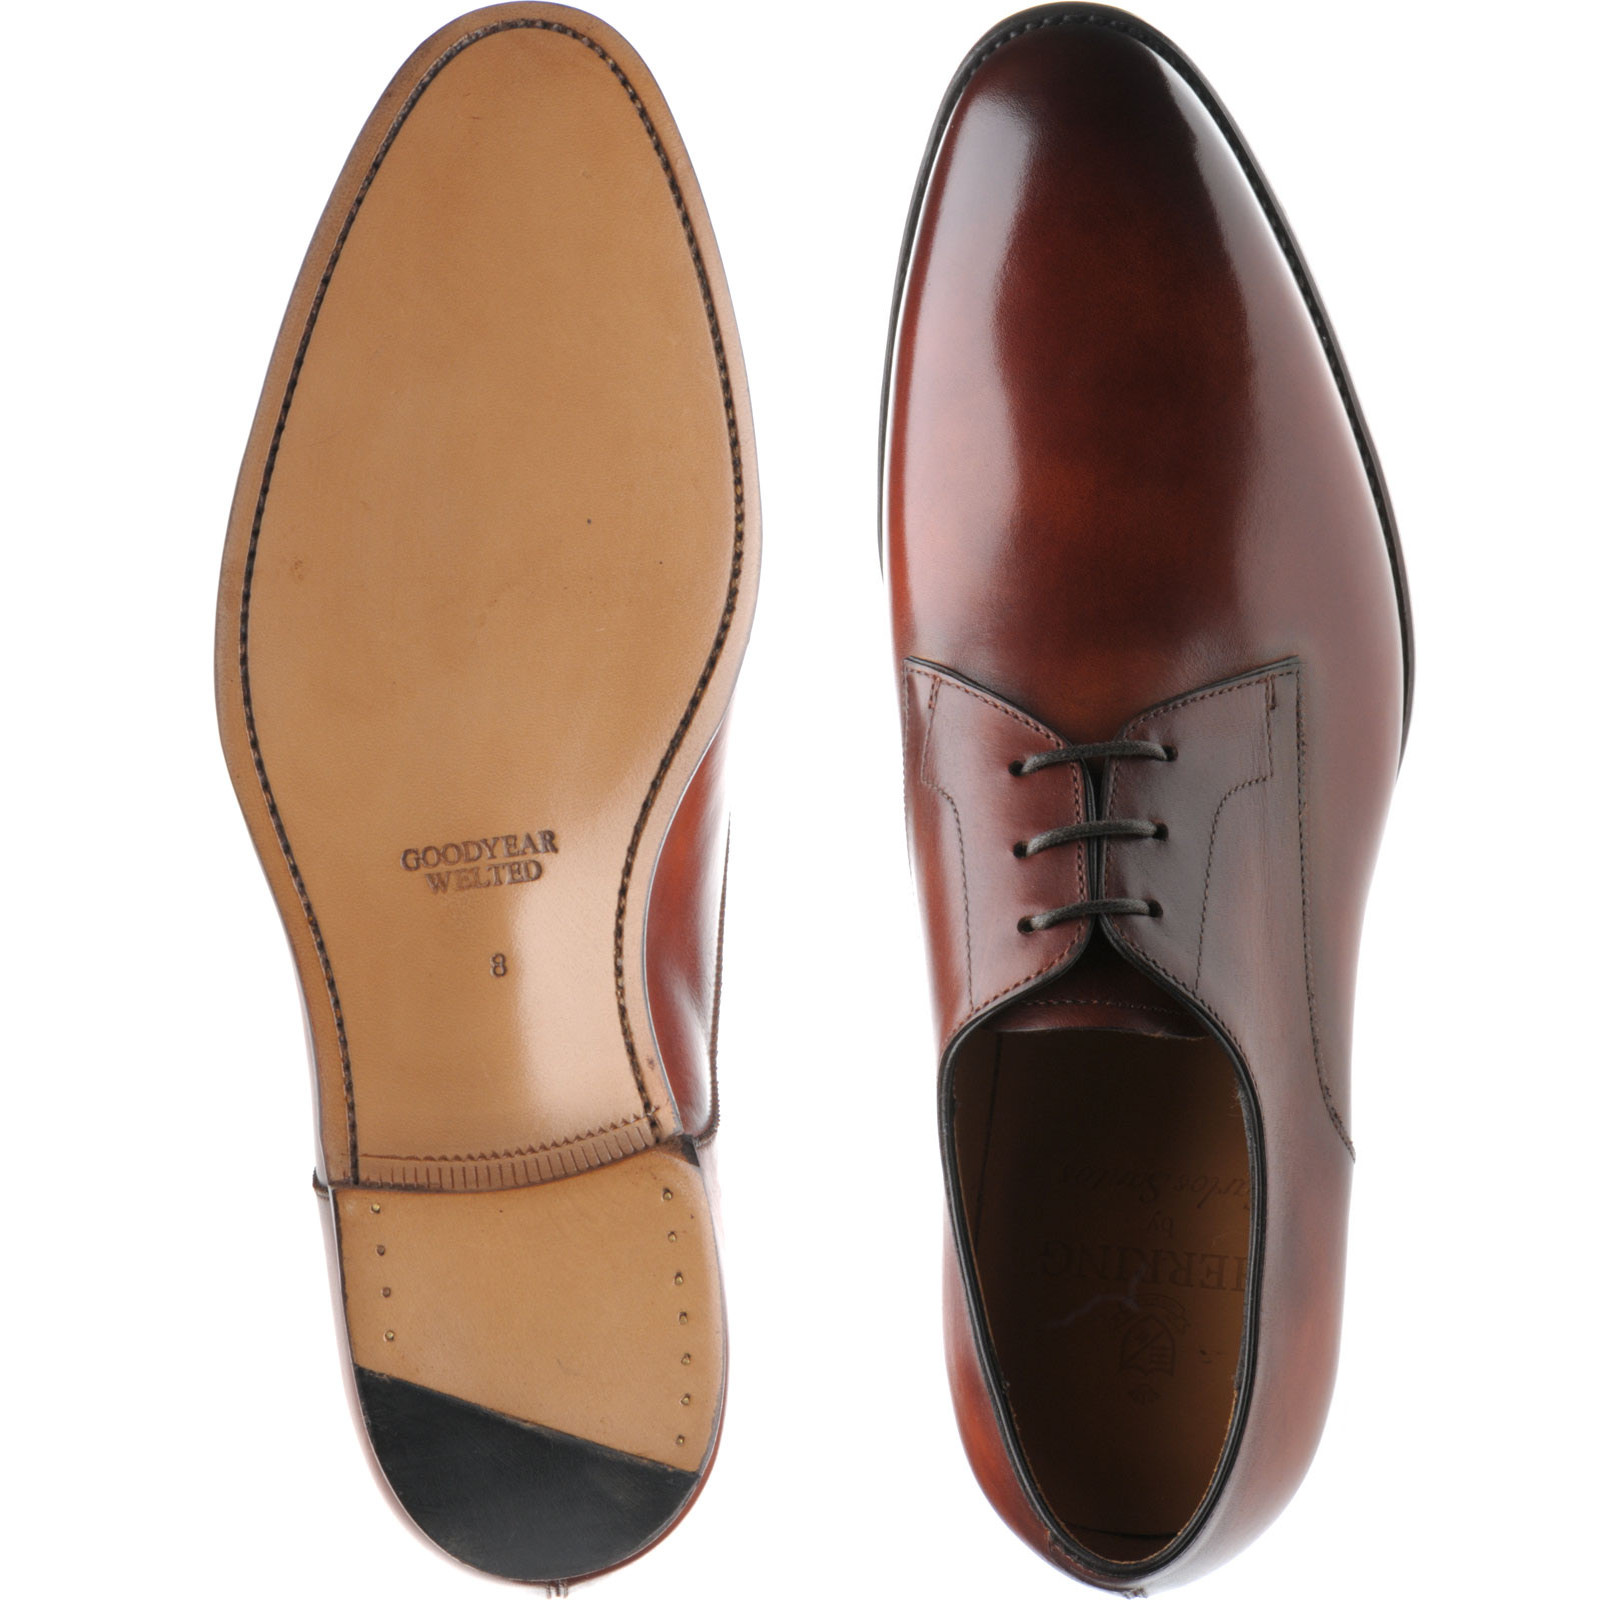 Herring shoes | Herring Classic | Golding Derby shoes in Rosewood Calf ...